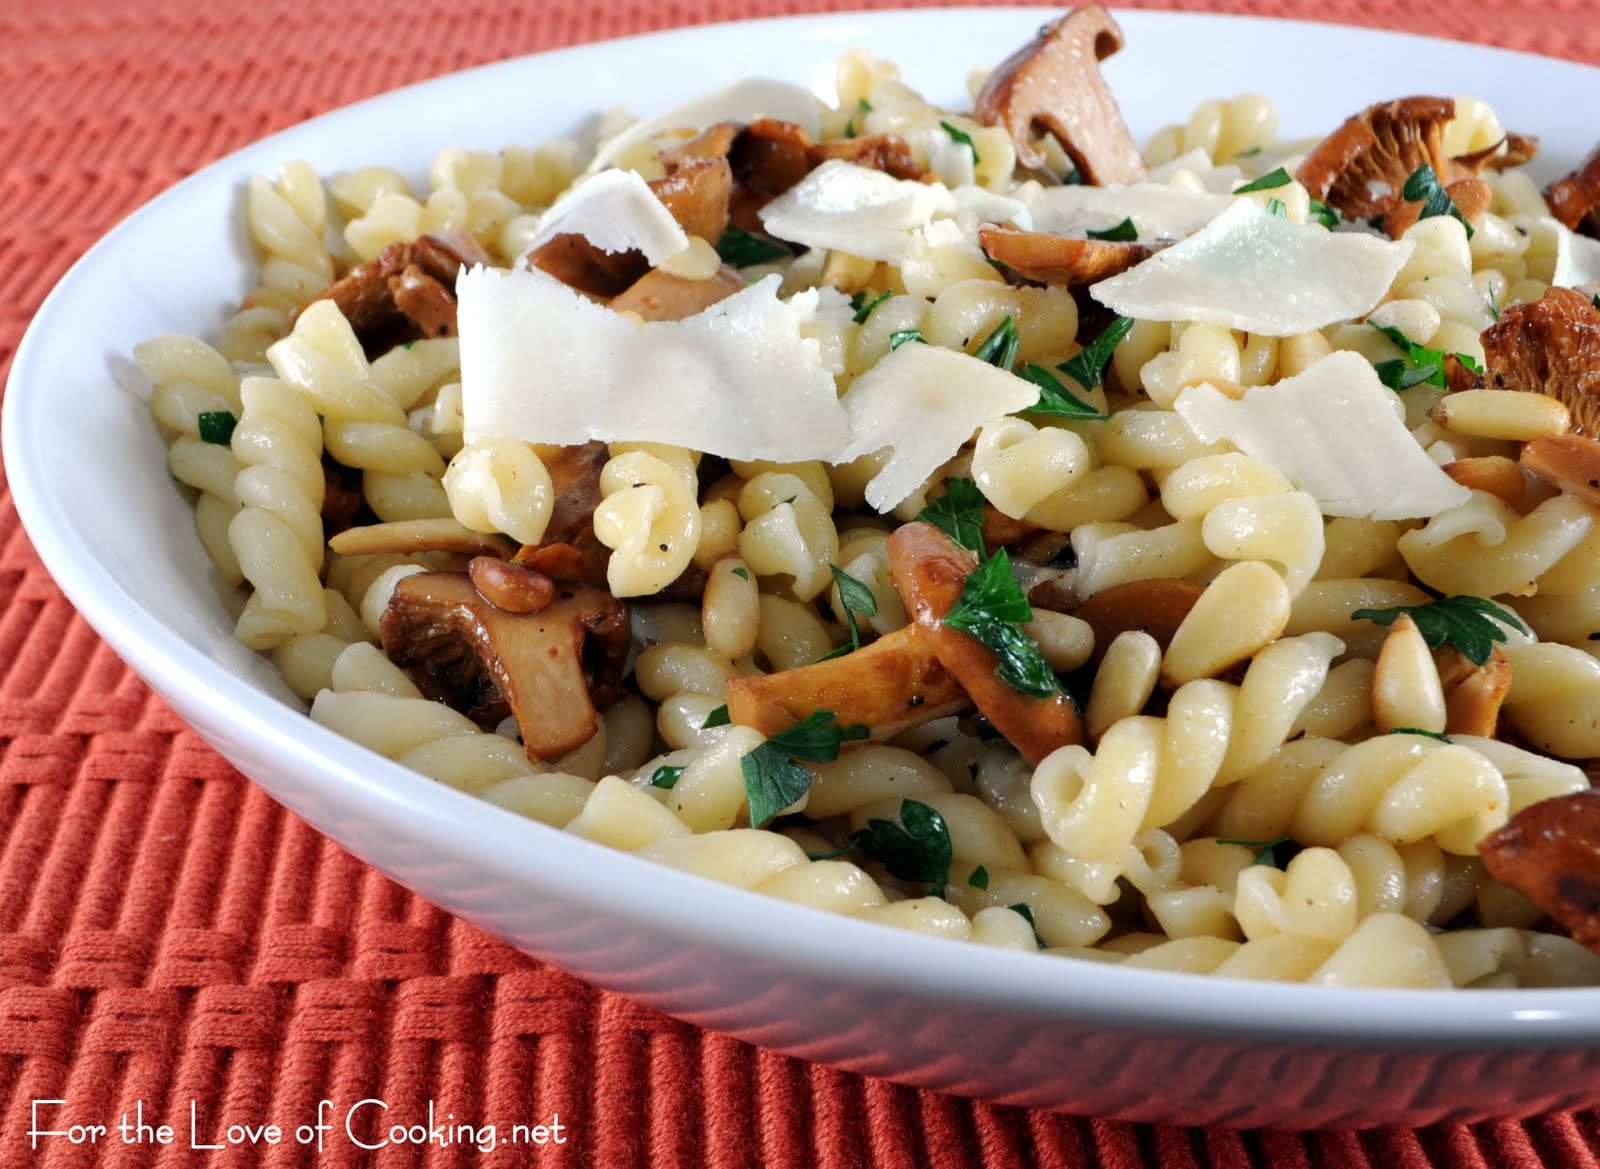 Gemelli with Chanterelles, Pine Nuts, and Parmesan